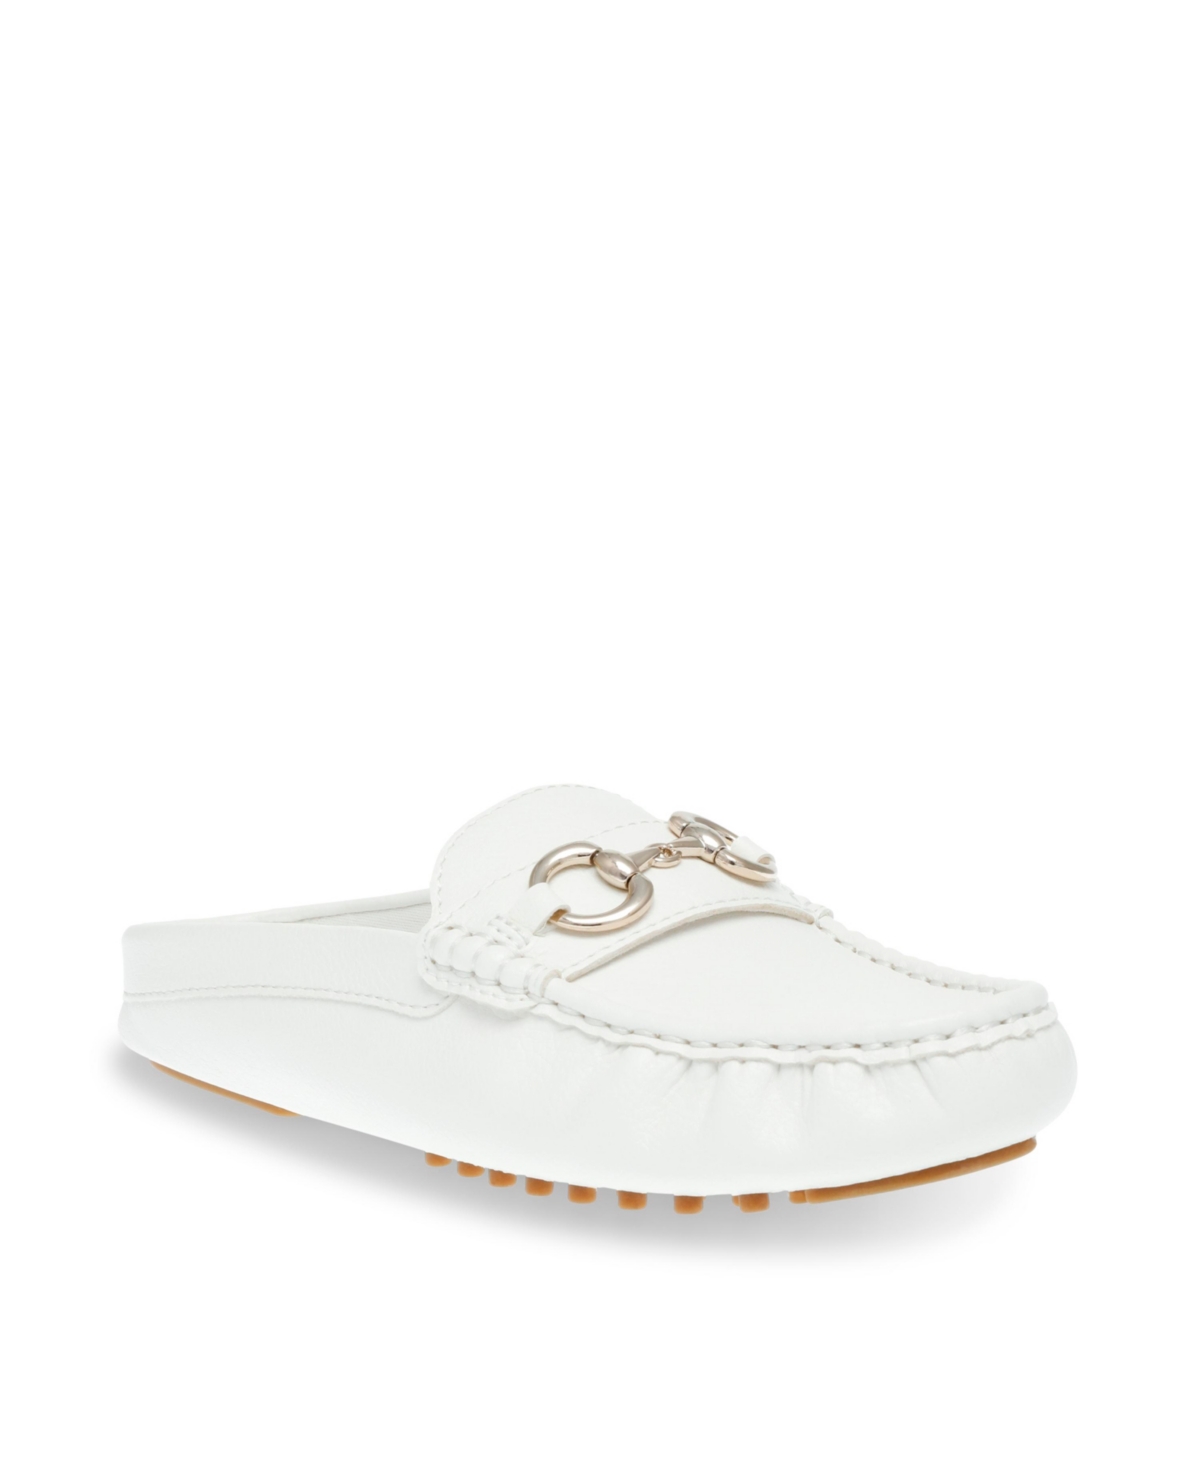 Women's Cooper Slip On Mule Loafers - White Tumbled